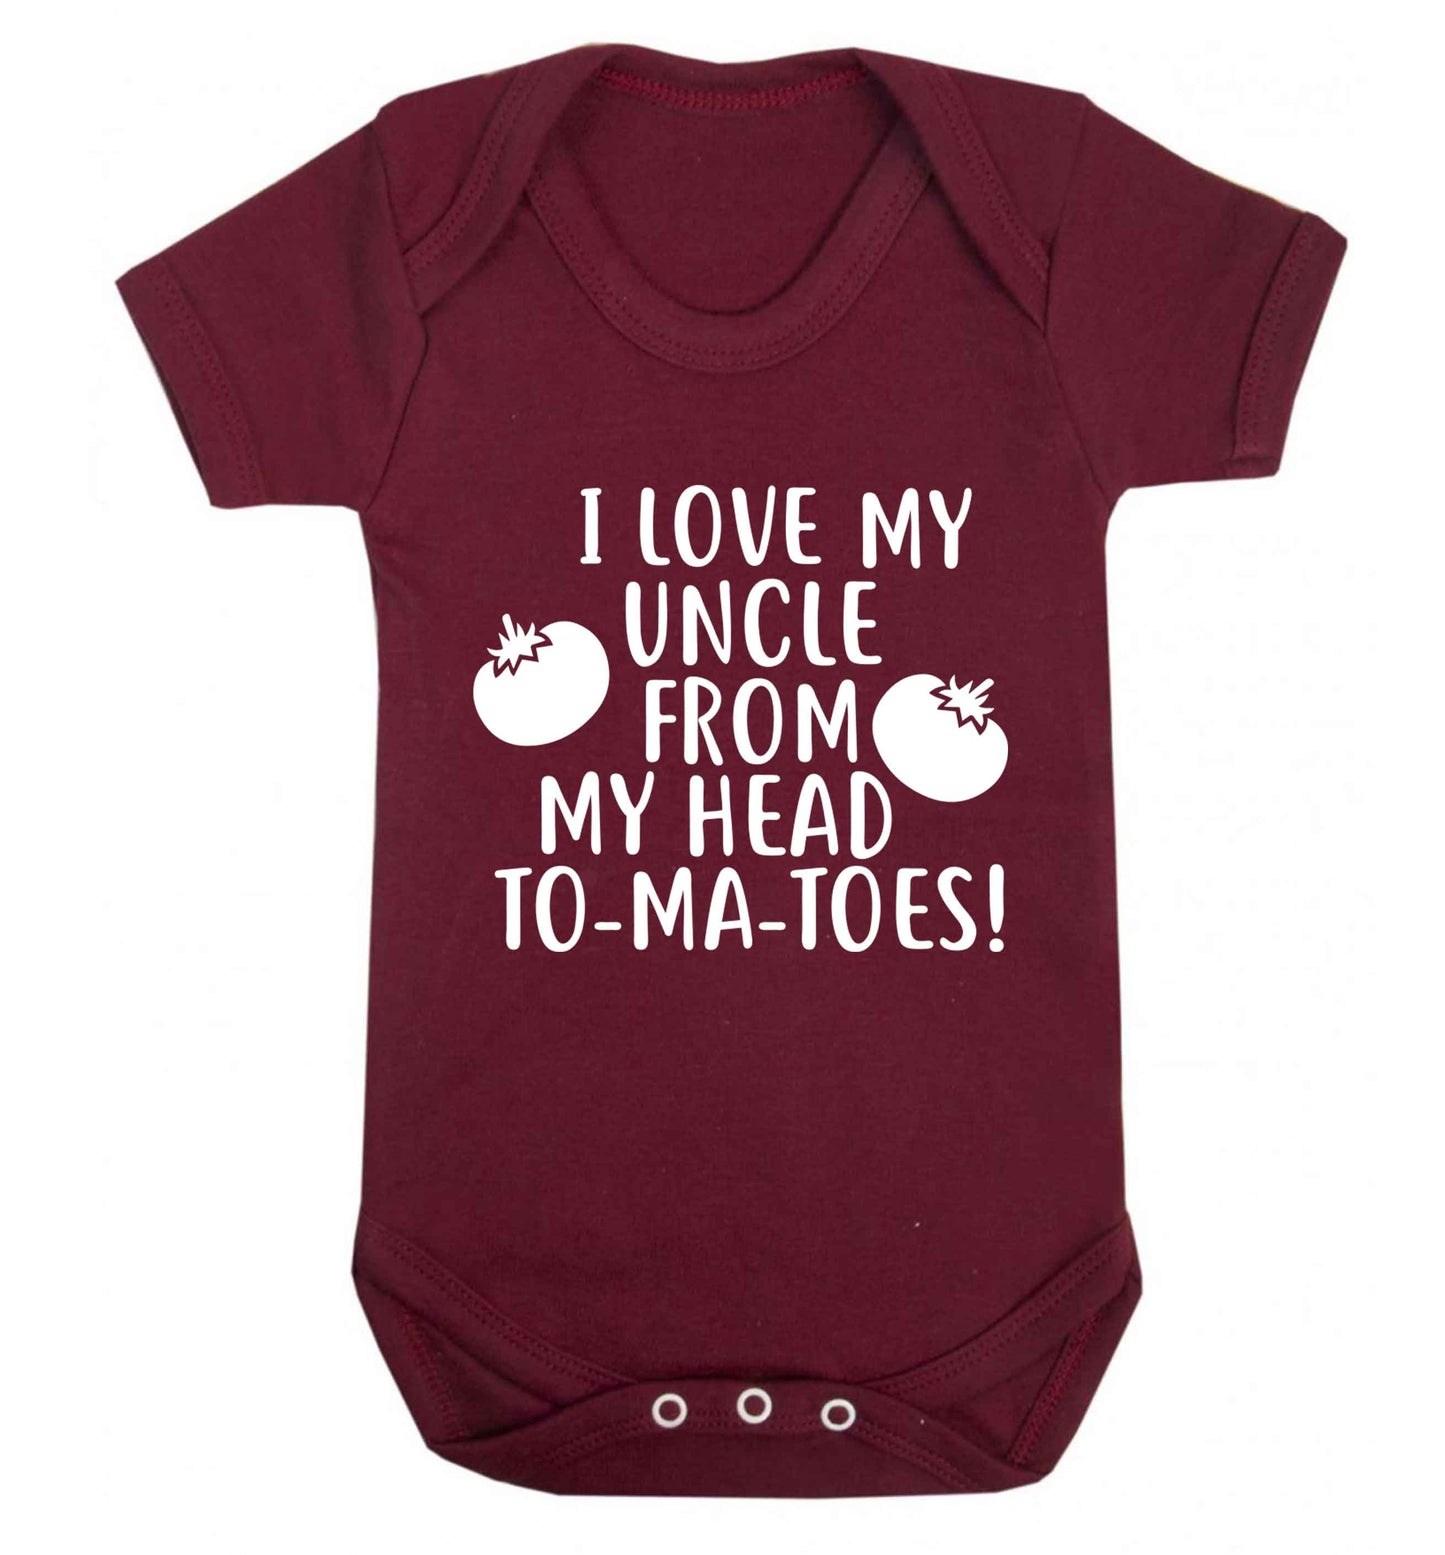 I love my uncle from my head To-Ma-Toes Baby Vest maroon 18-24 months